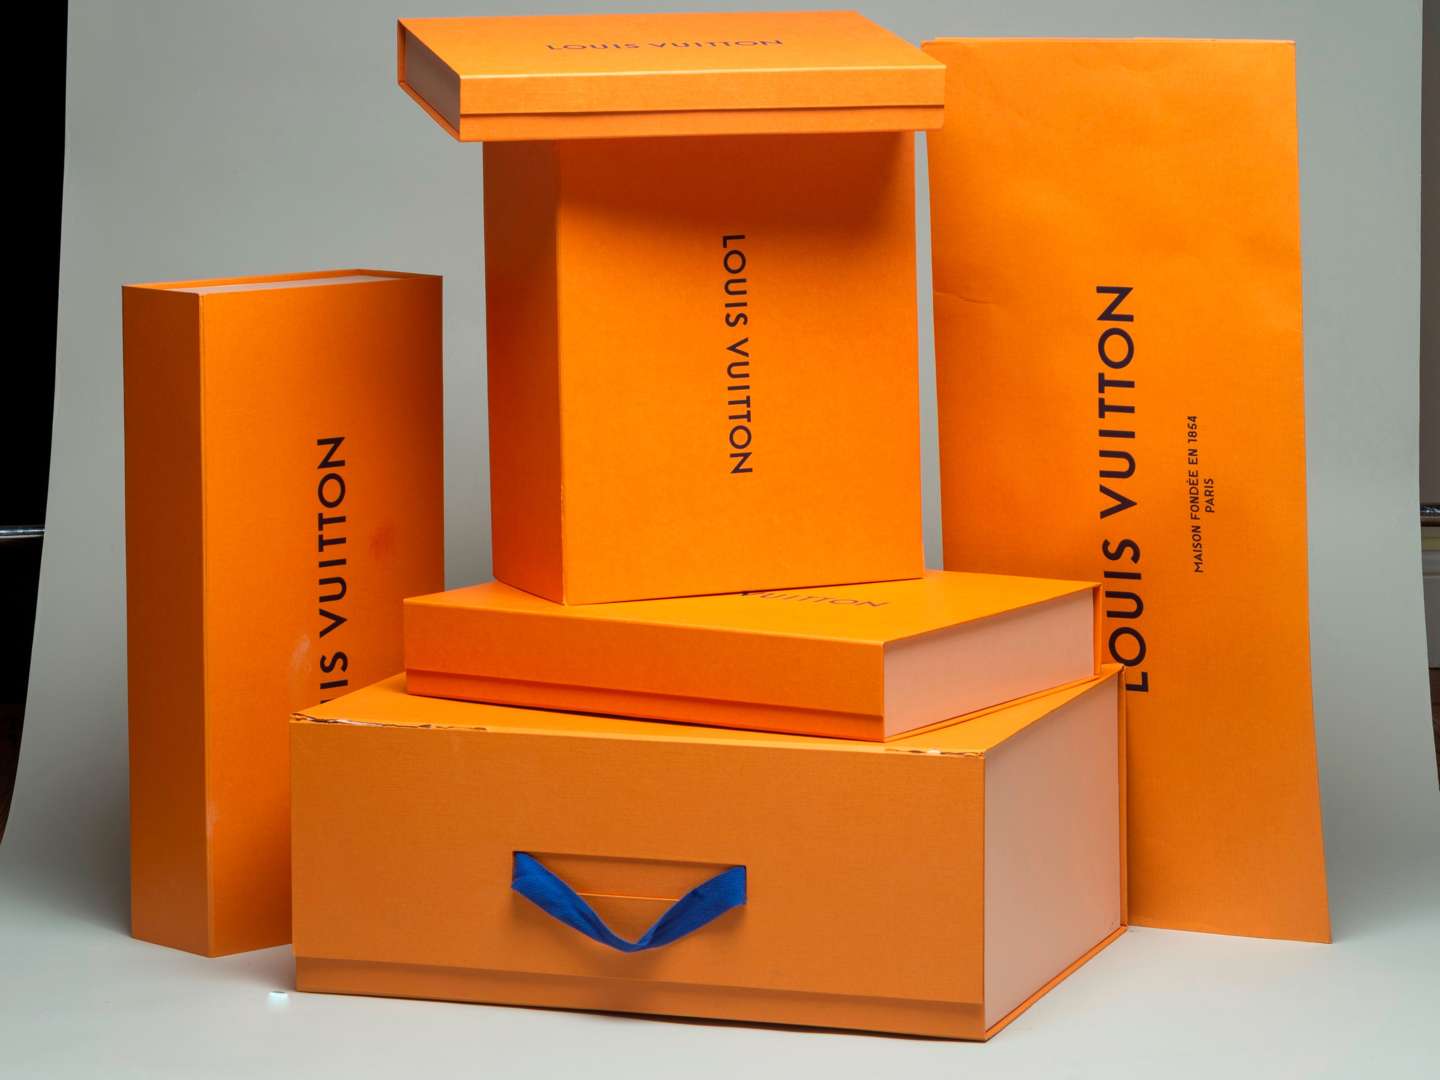 <p>Selection of Louis Vuitton boxes and bag</p>